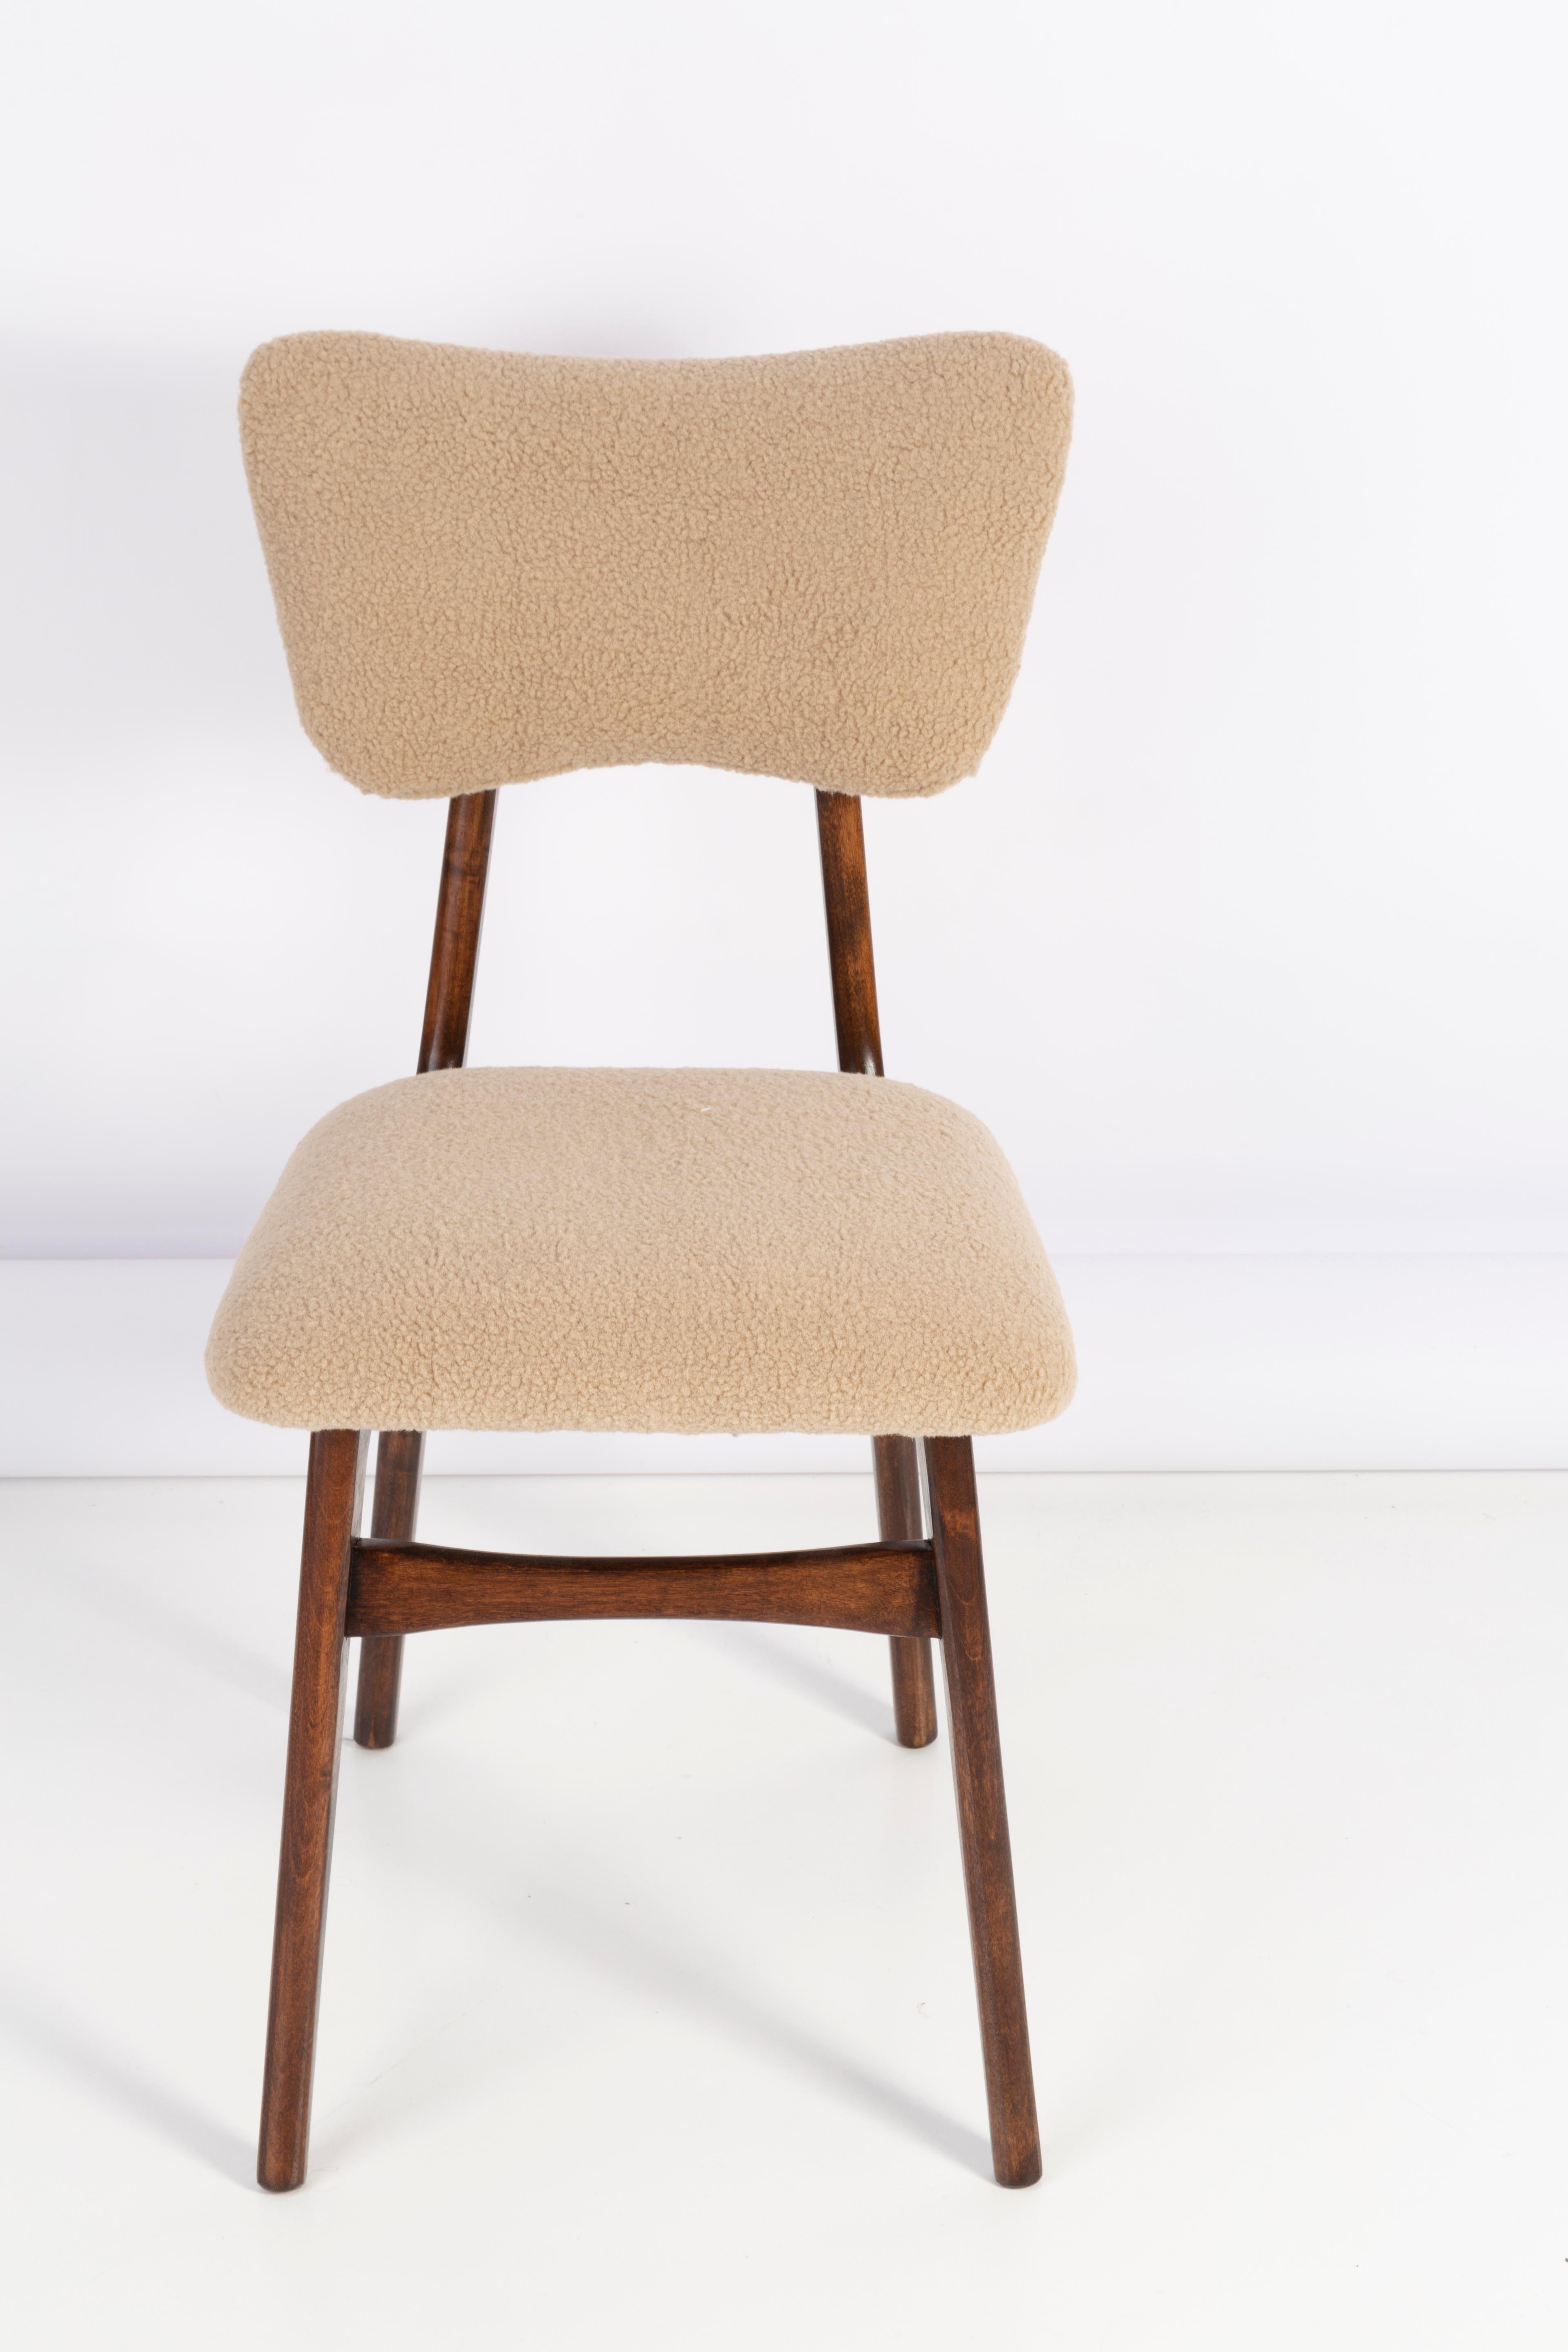 20th Century Camel Soft Boucle Chair, 1960s For Sale 4